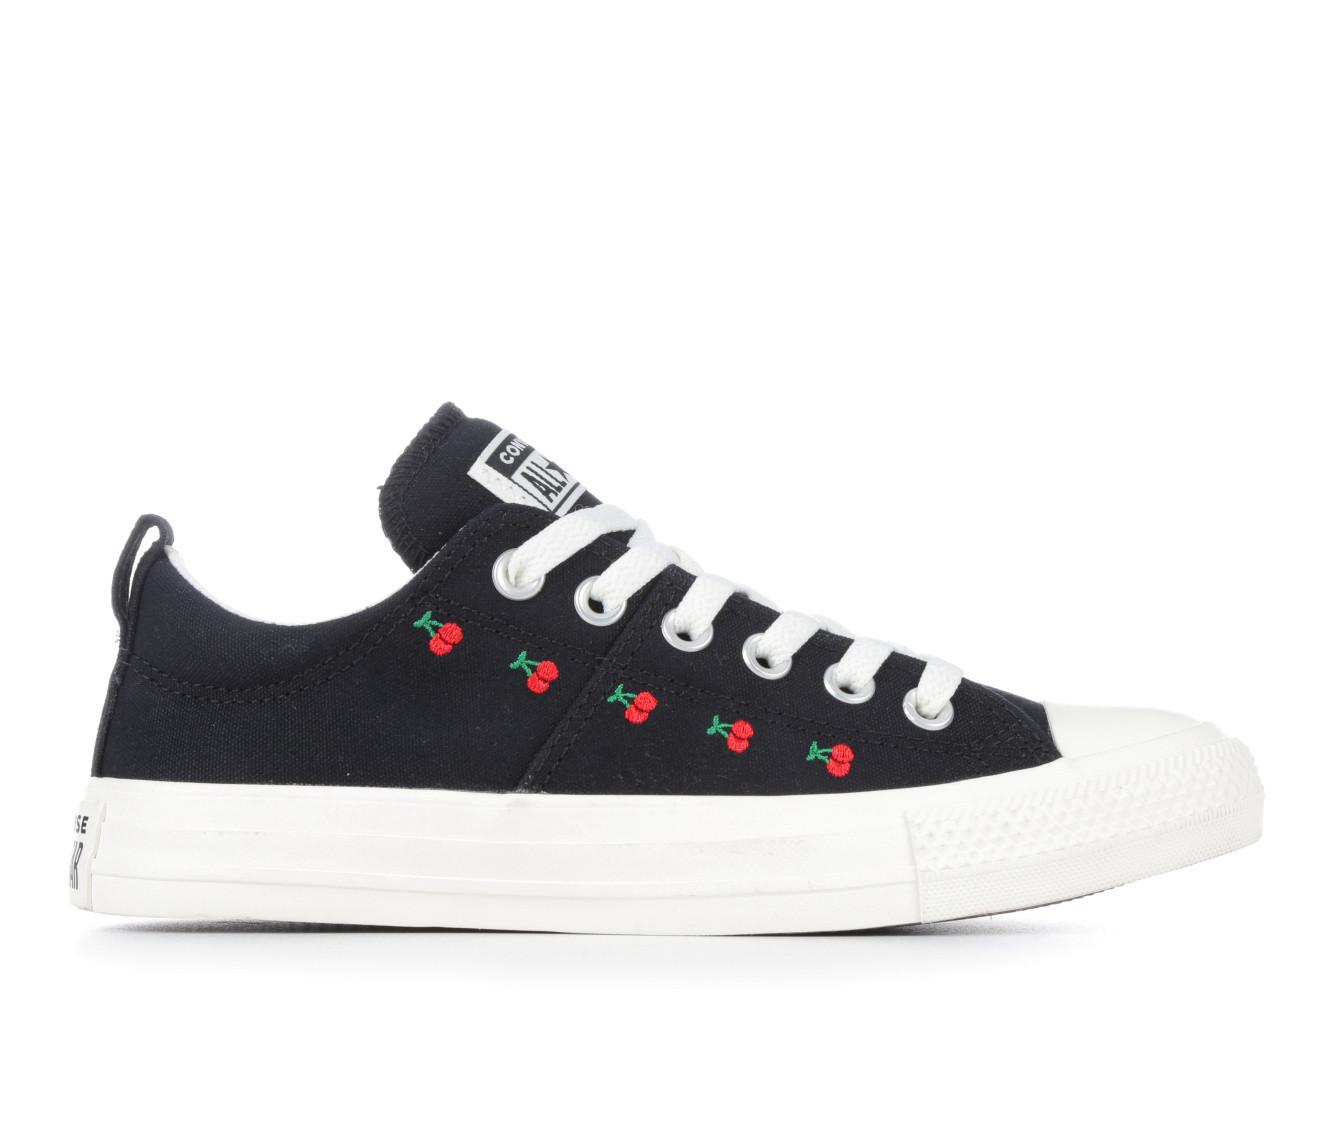 Women's Converse Chuck Taylor All Star Madison Ox Cherry Sneakers